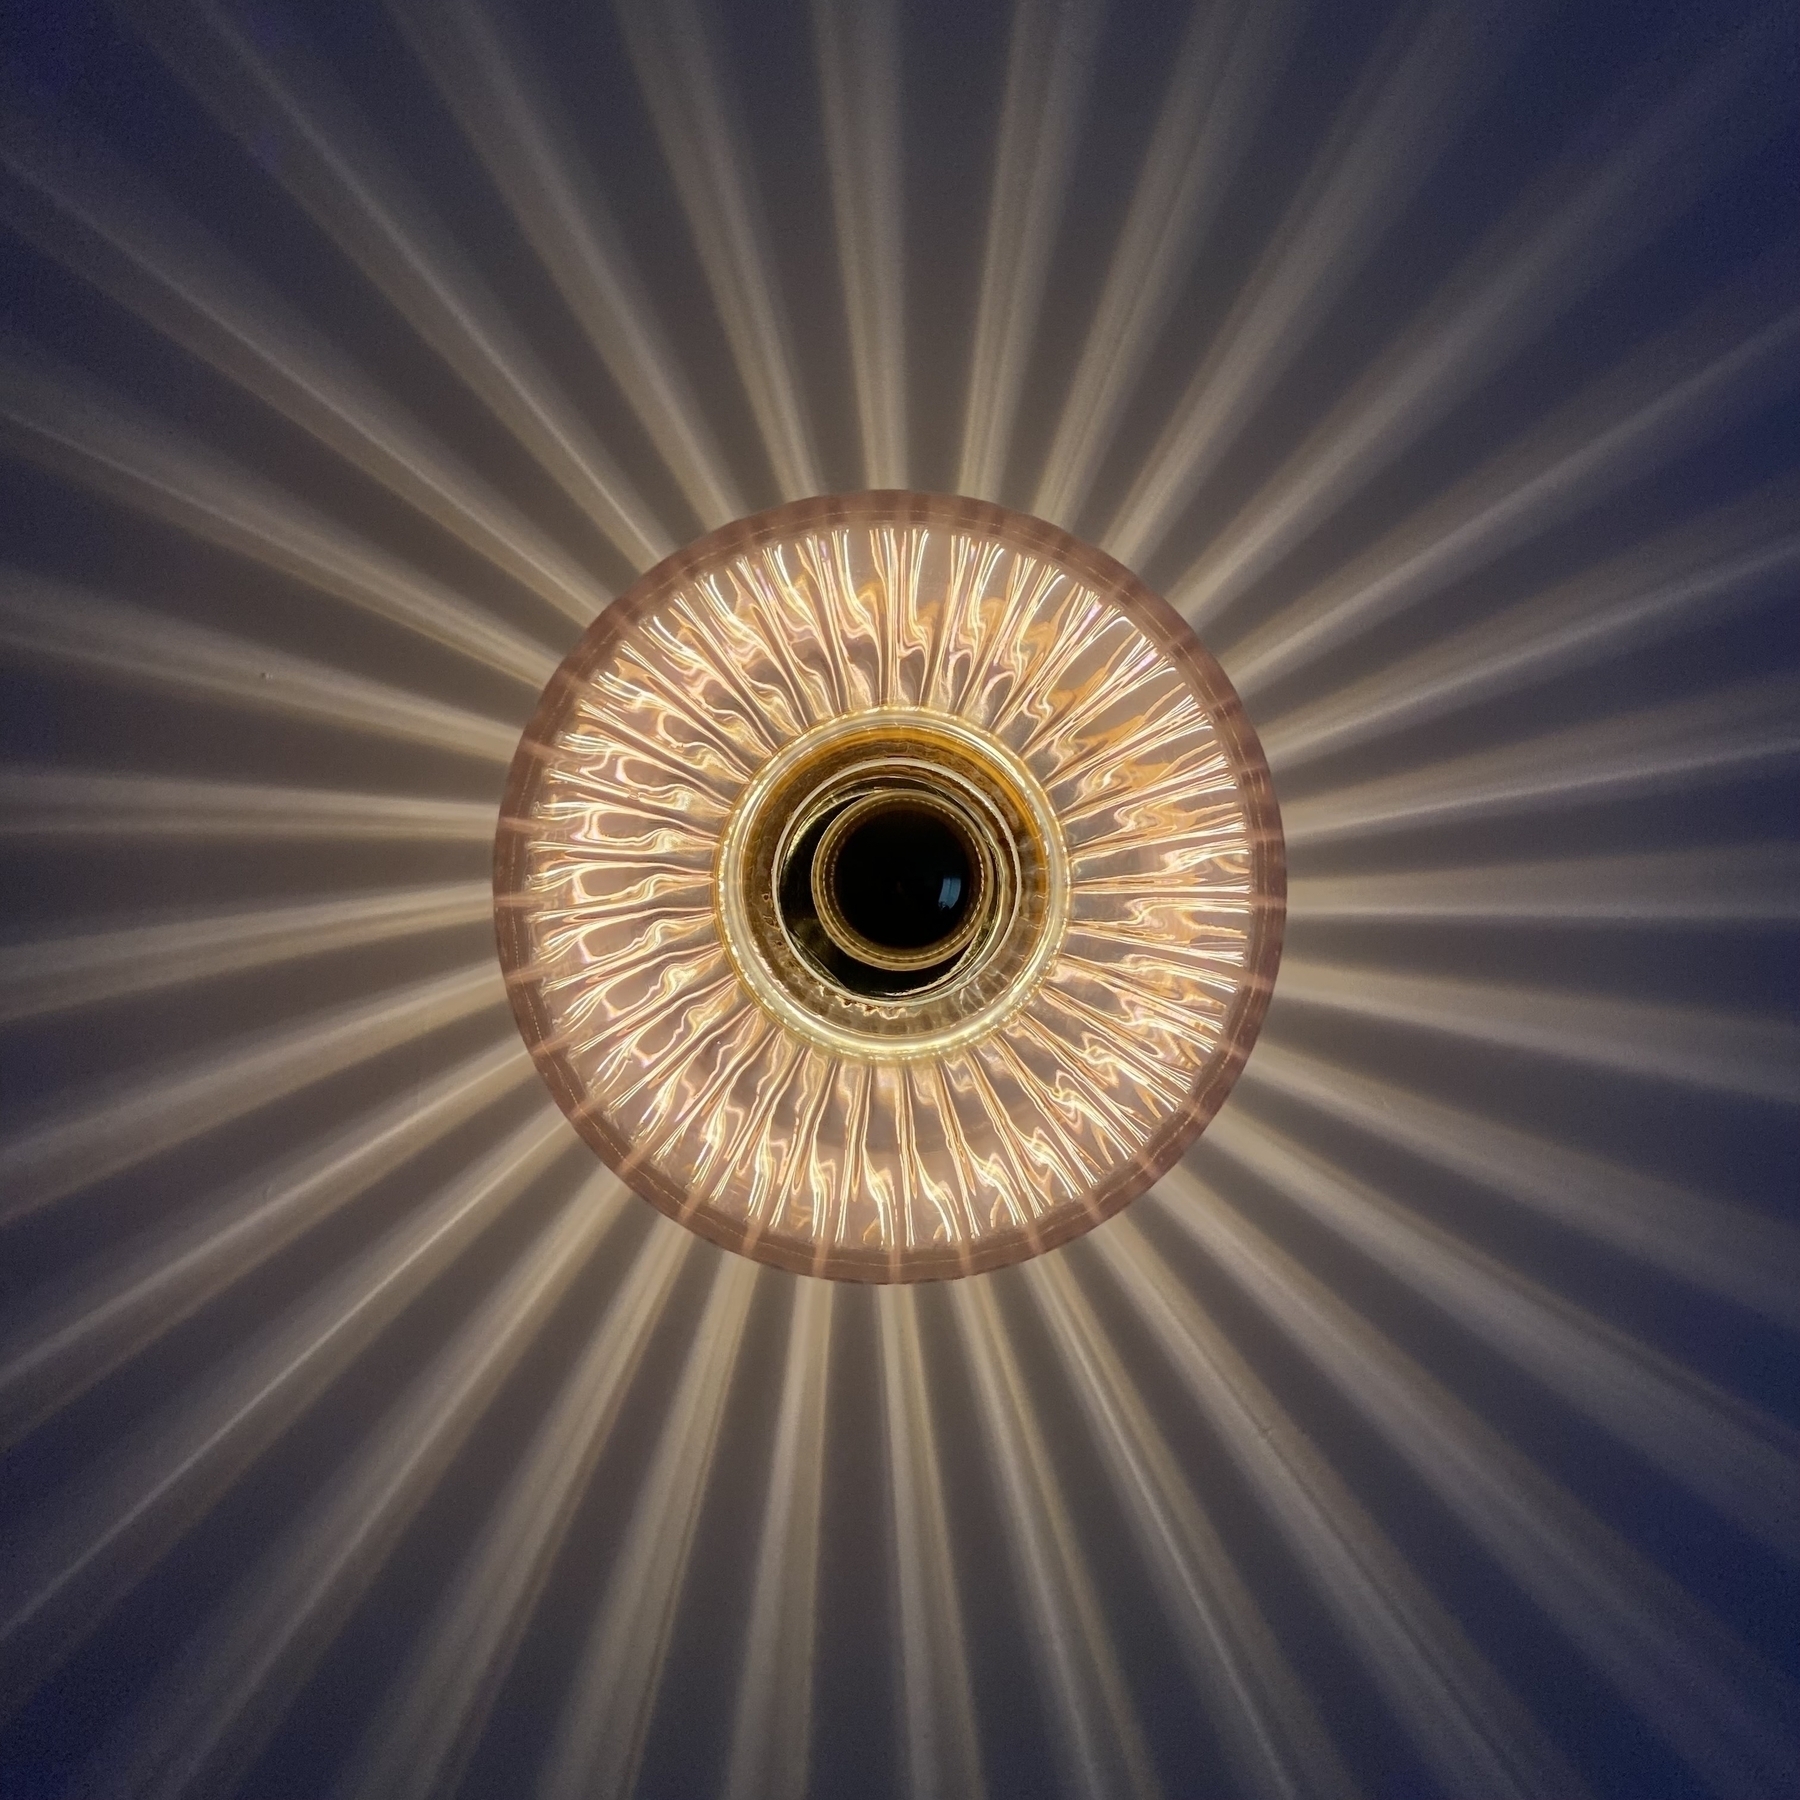 A wall mounted circular glass light fixture with 33 equidistant rays shooting out from around the circle in all directions. 